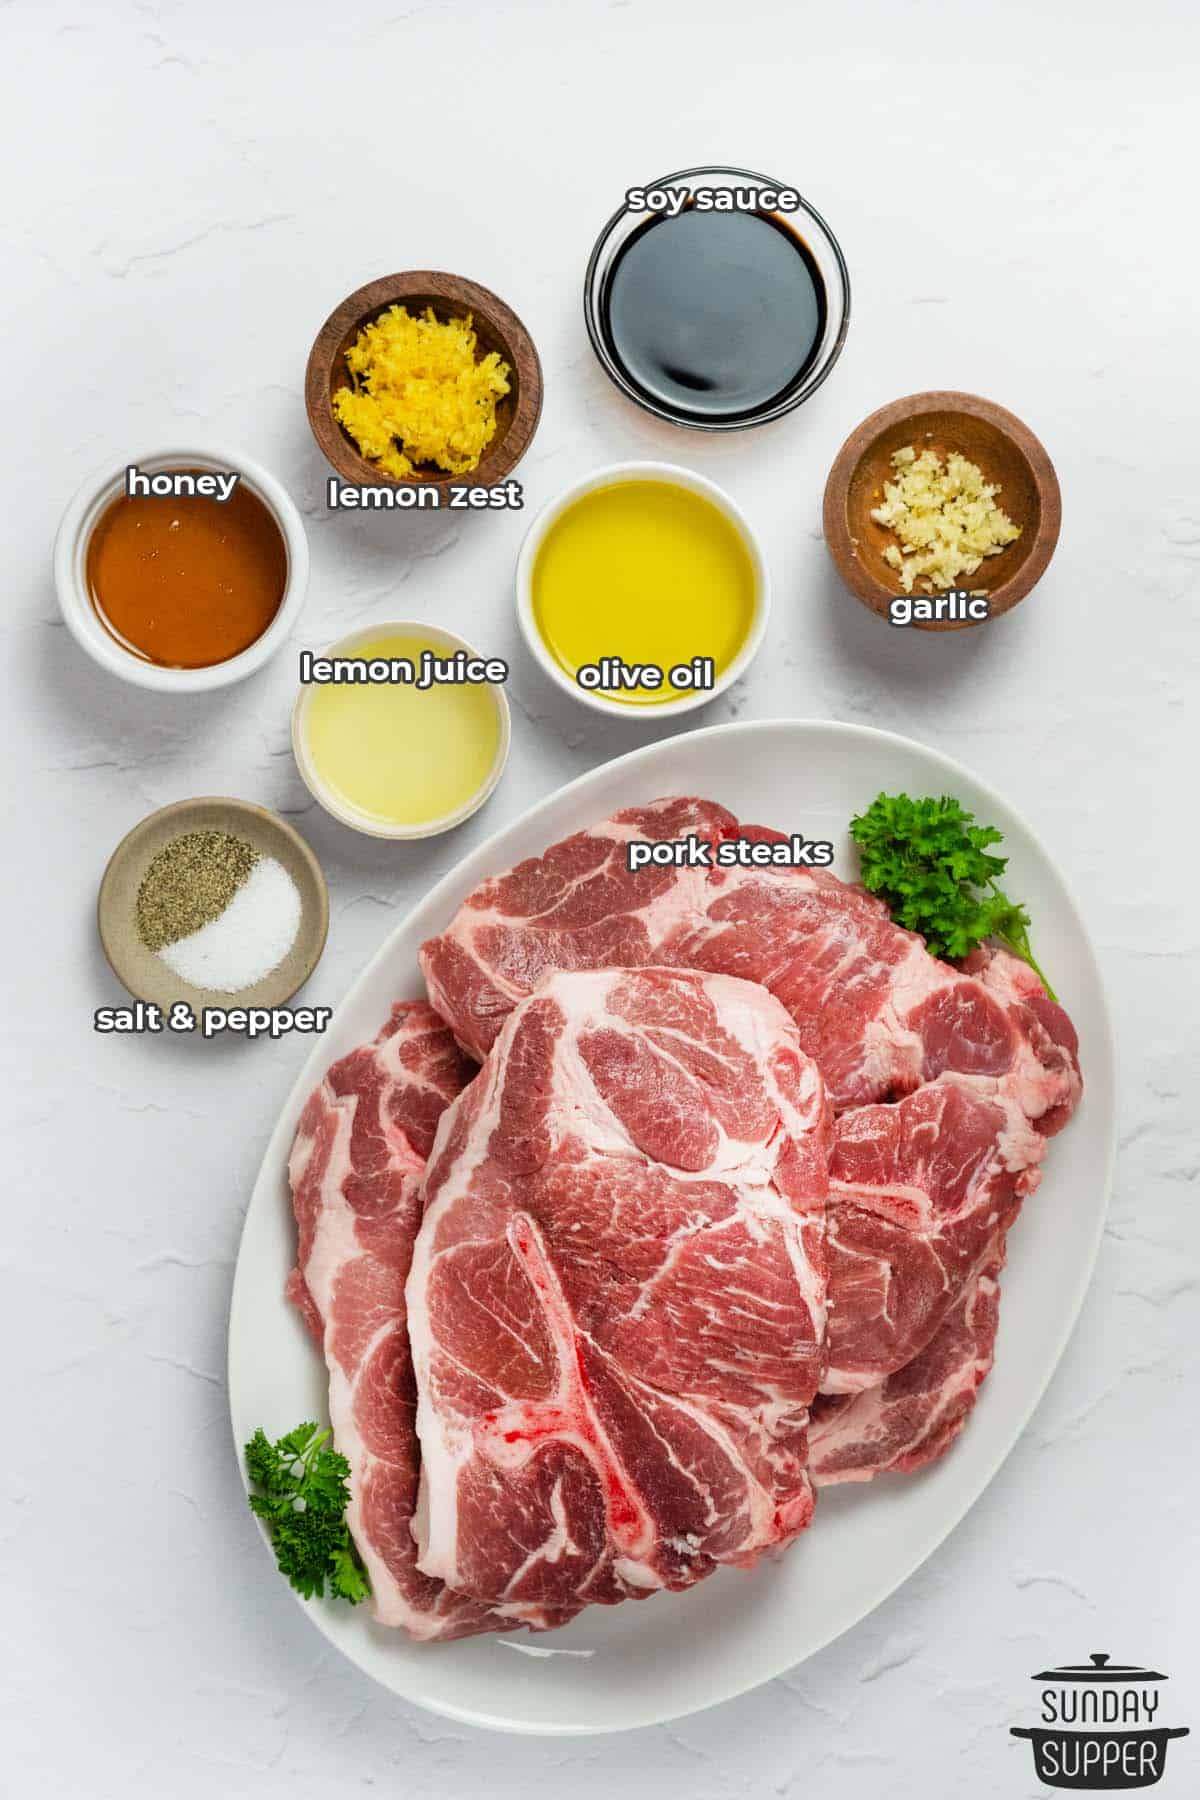 all the ingredients for grilled pork steaks in separate bowls with labels